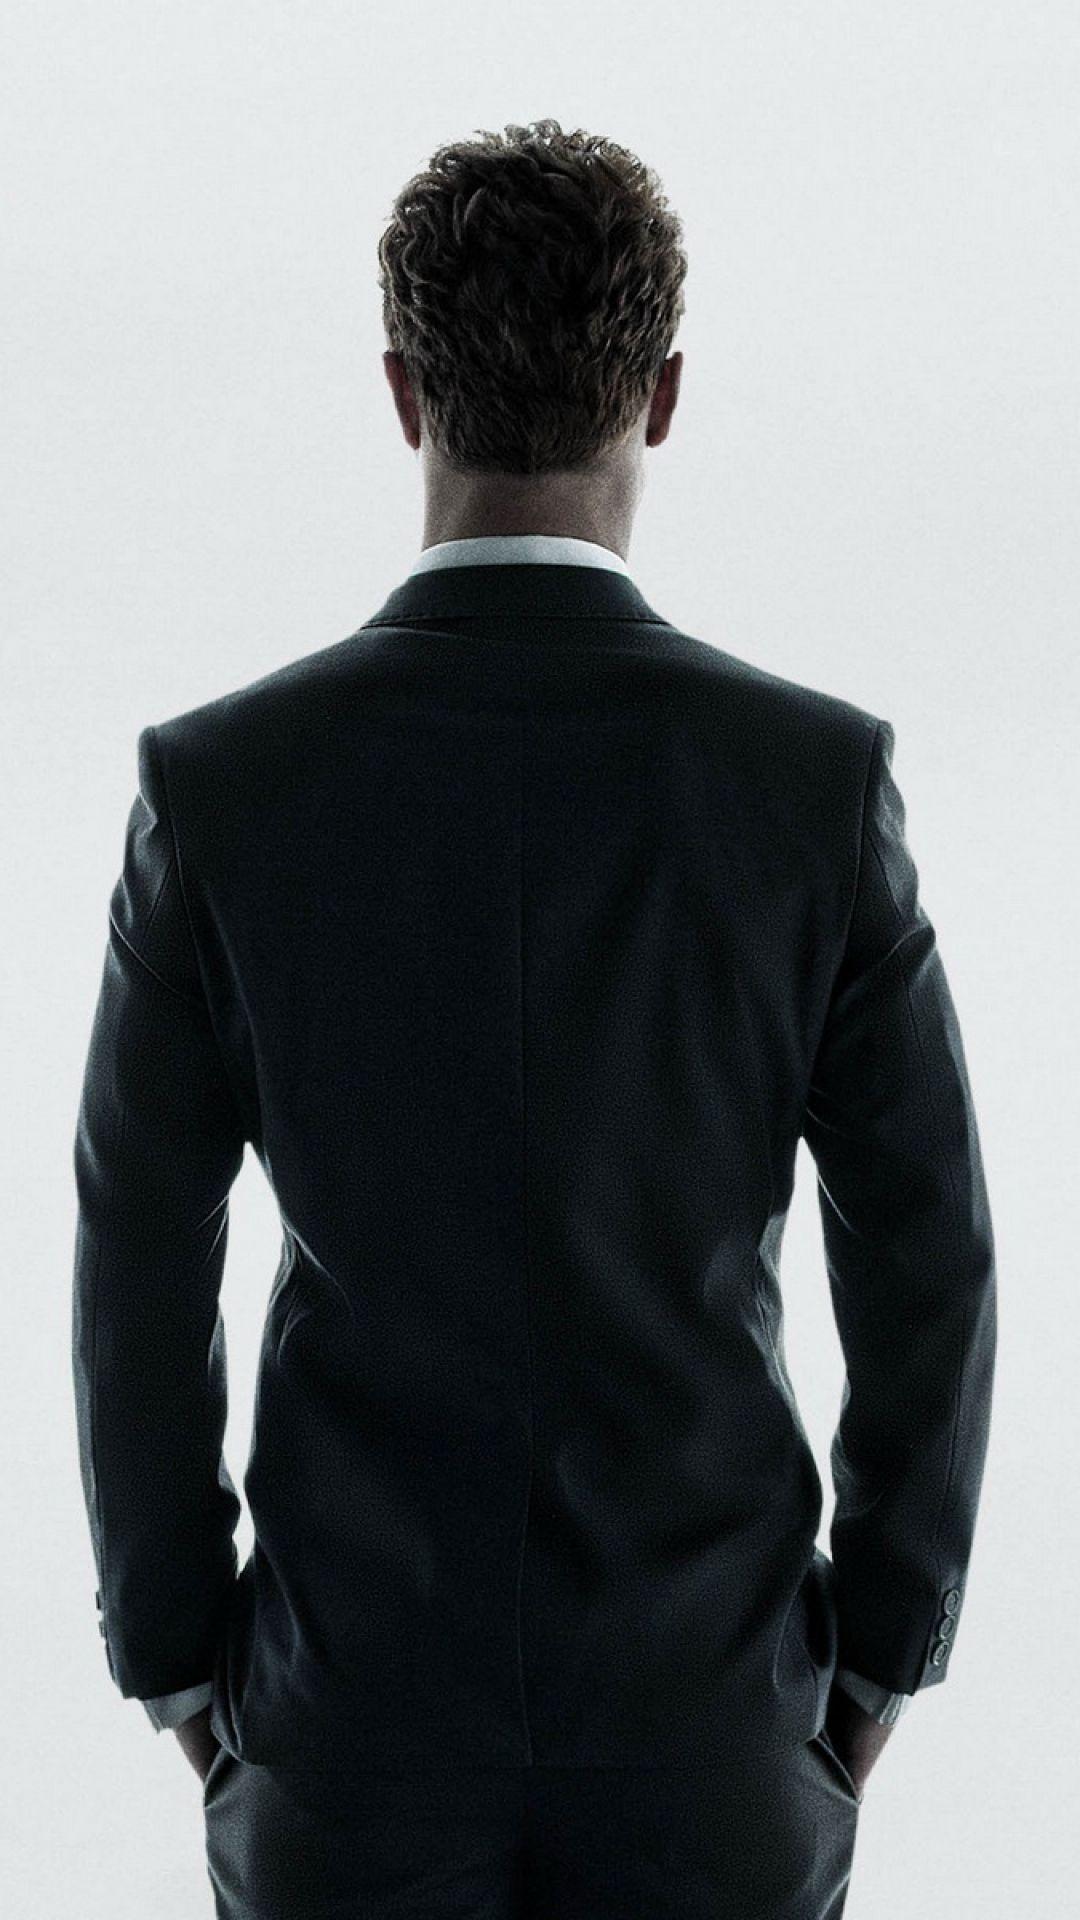 Fifty Shades Of Grey Black Suit Android Wallpaper free download